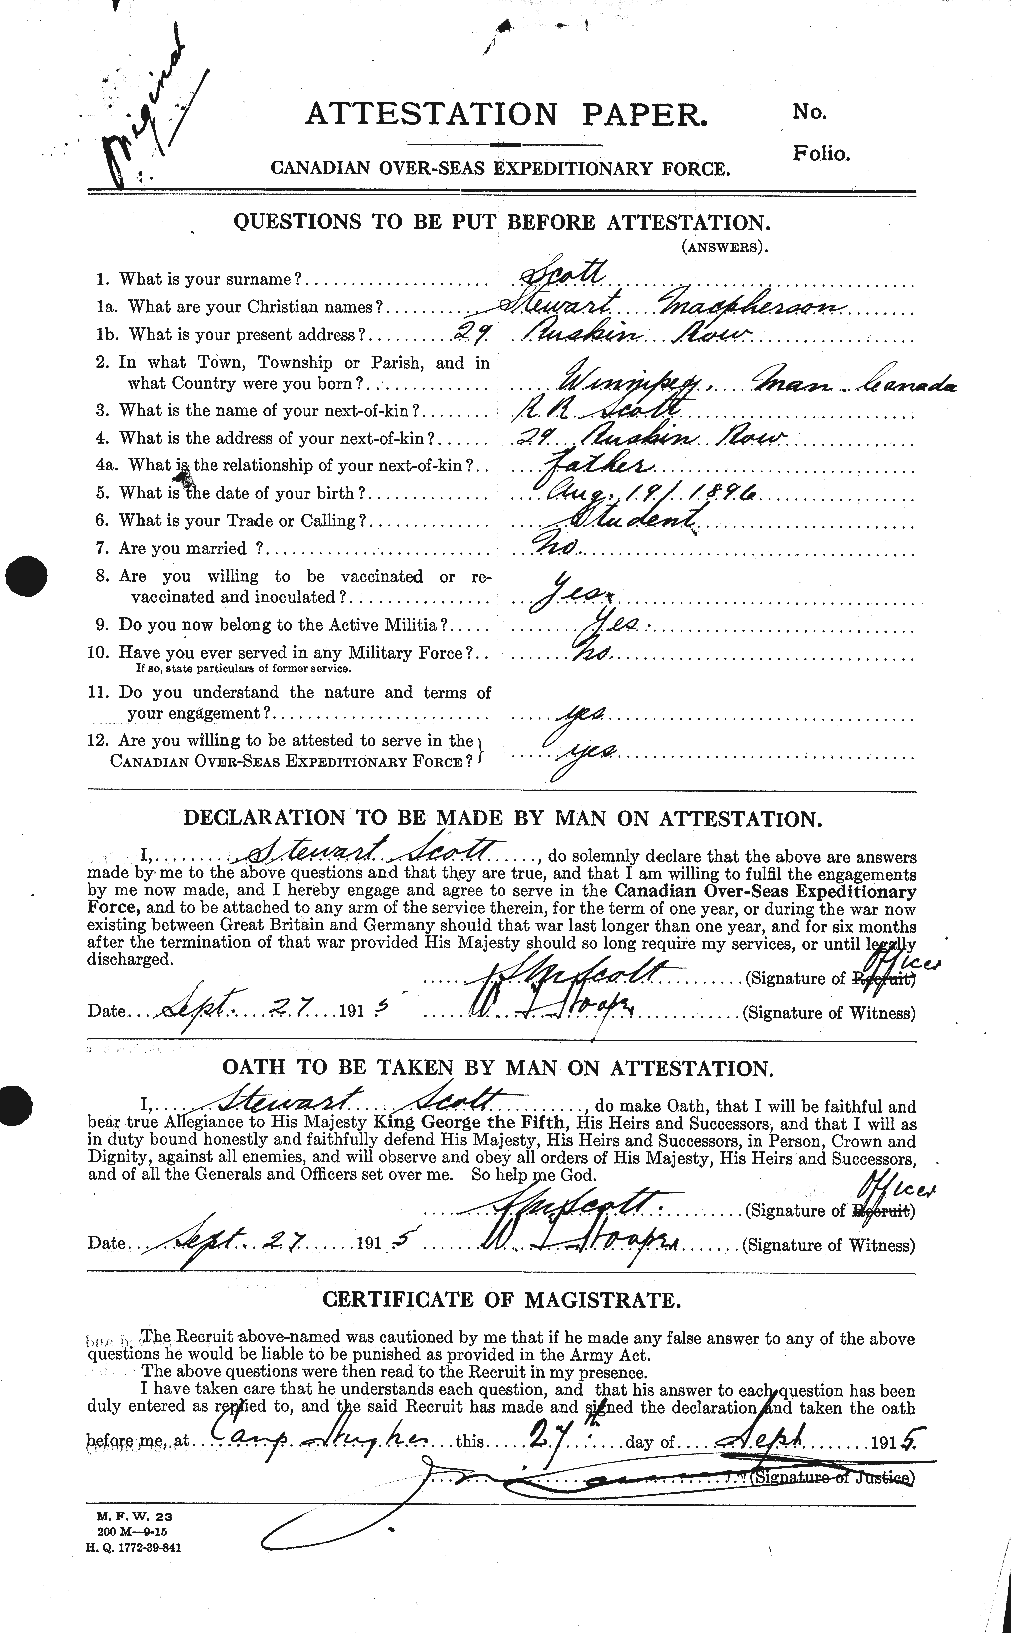 Personnel Records of the First World War - CEF 088557a